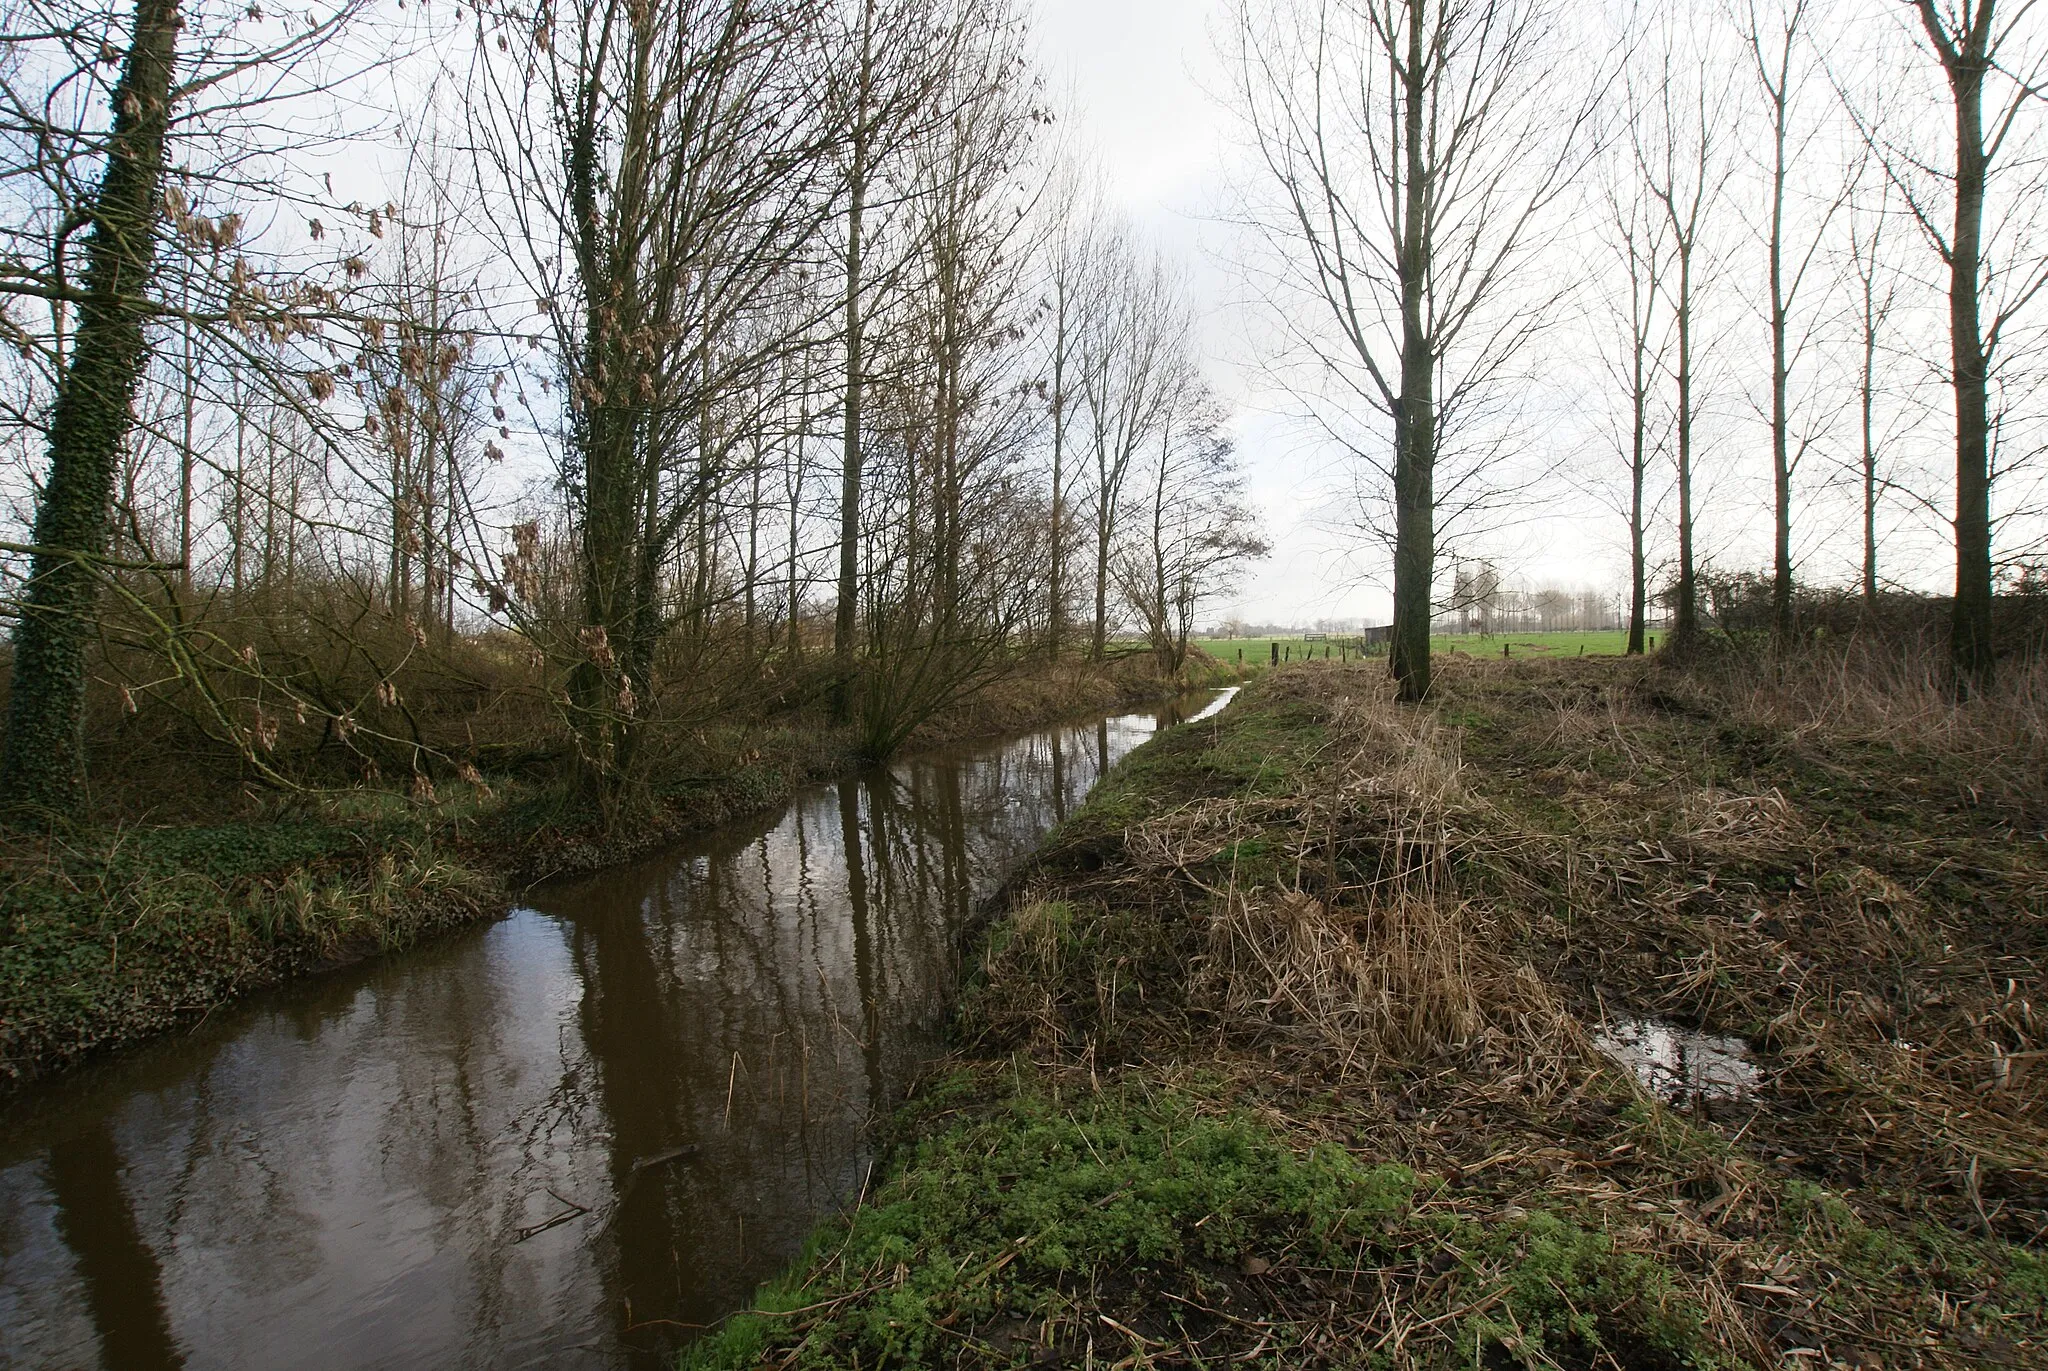 Photo showing: Beernem (Oedelem), Germany: The river Bergbeek at the Sijsele Straat in Western direction